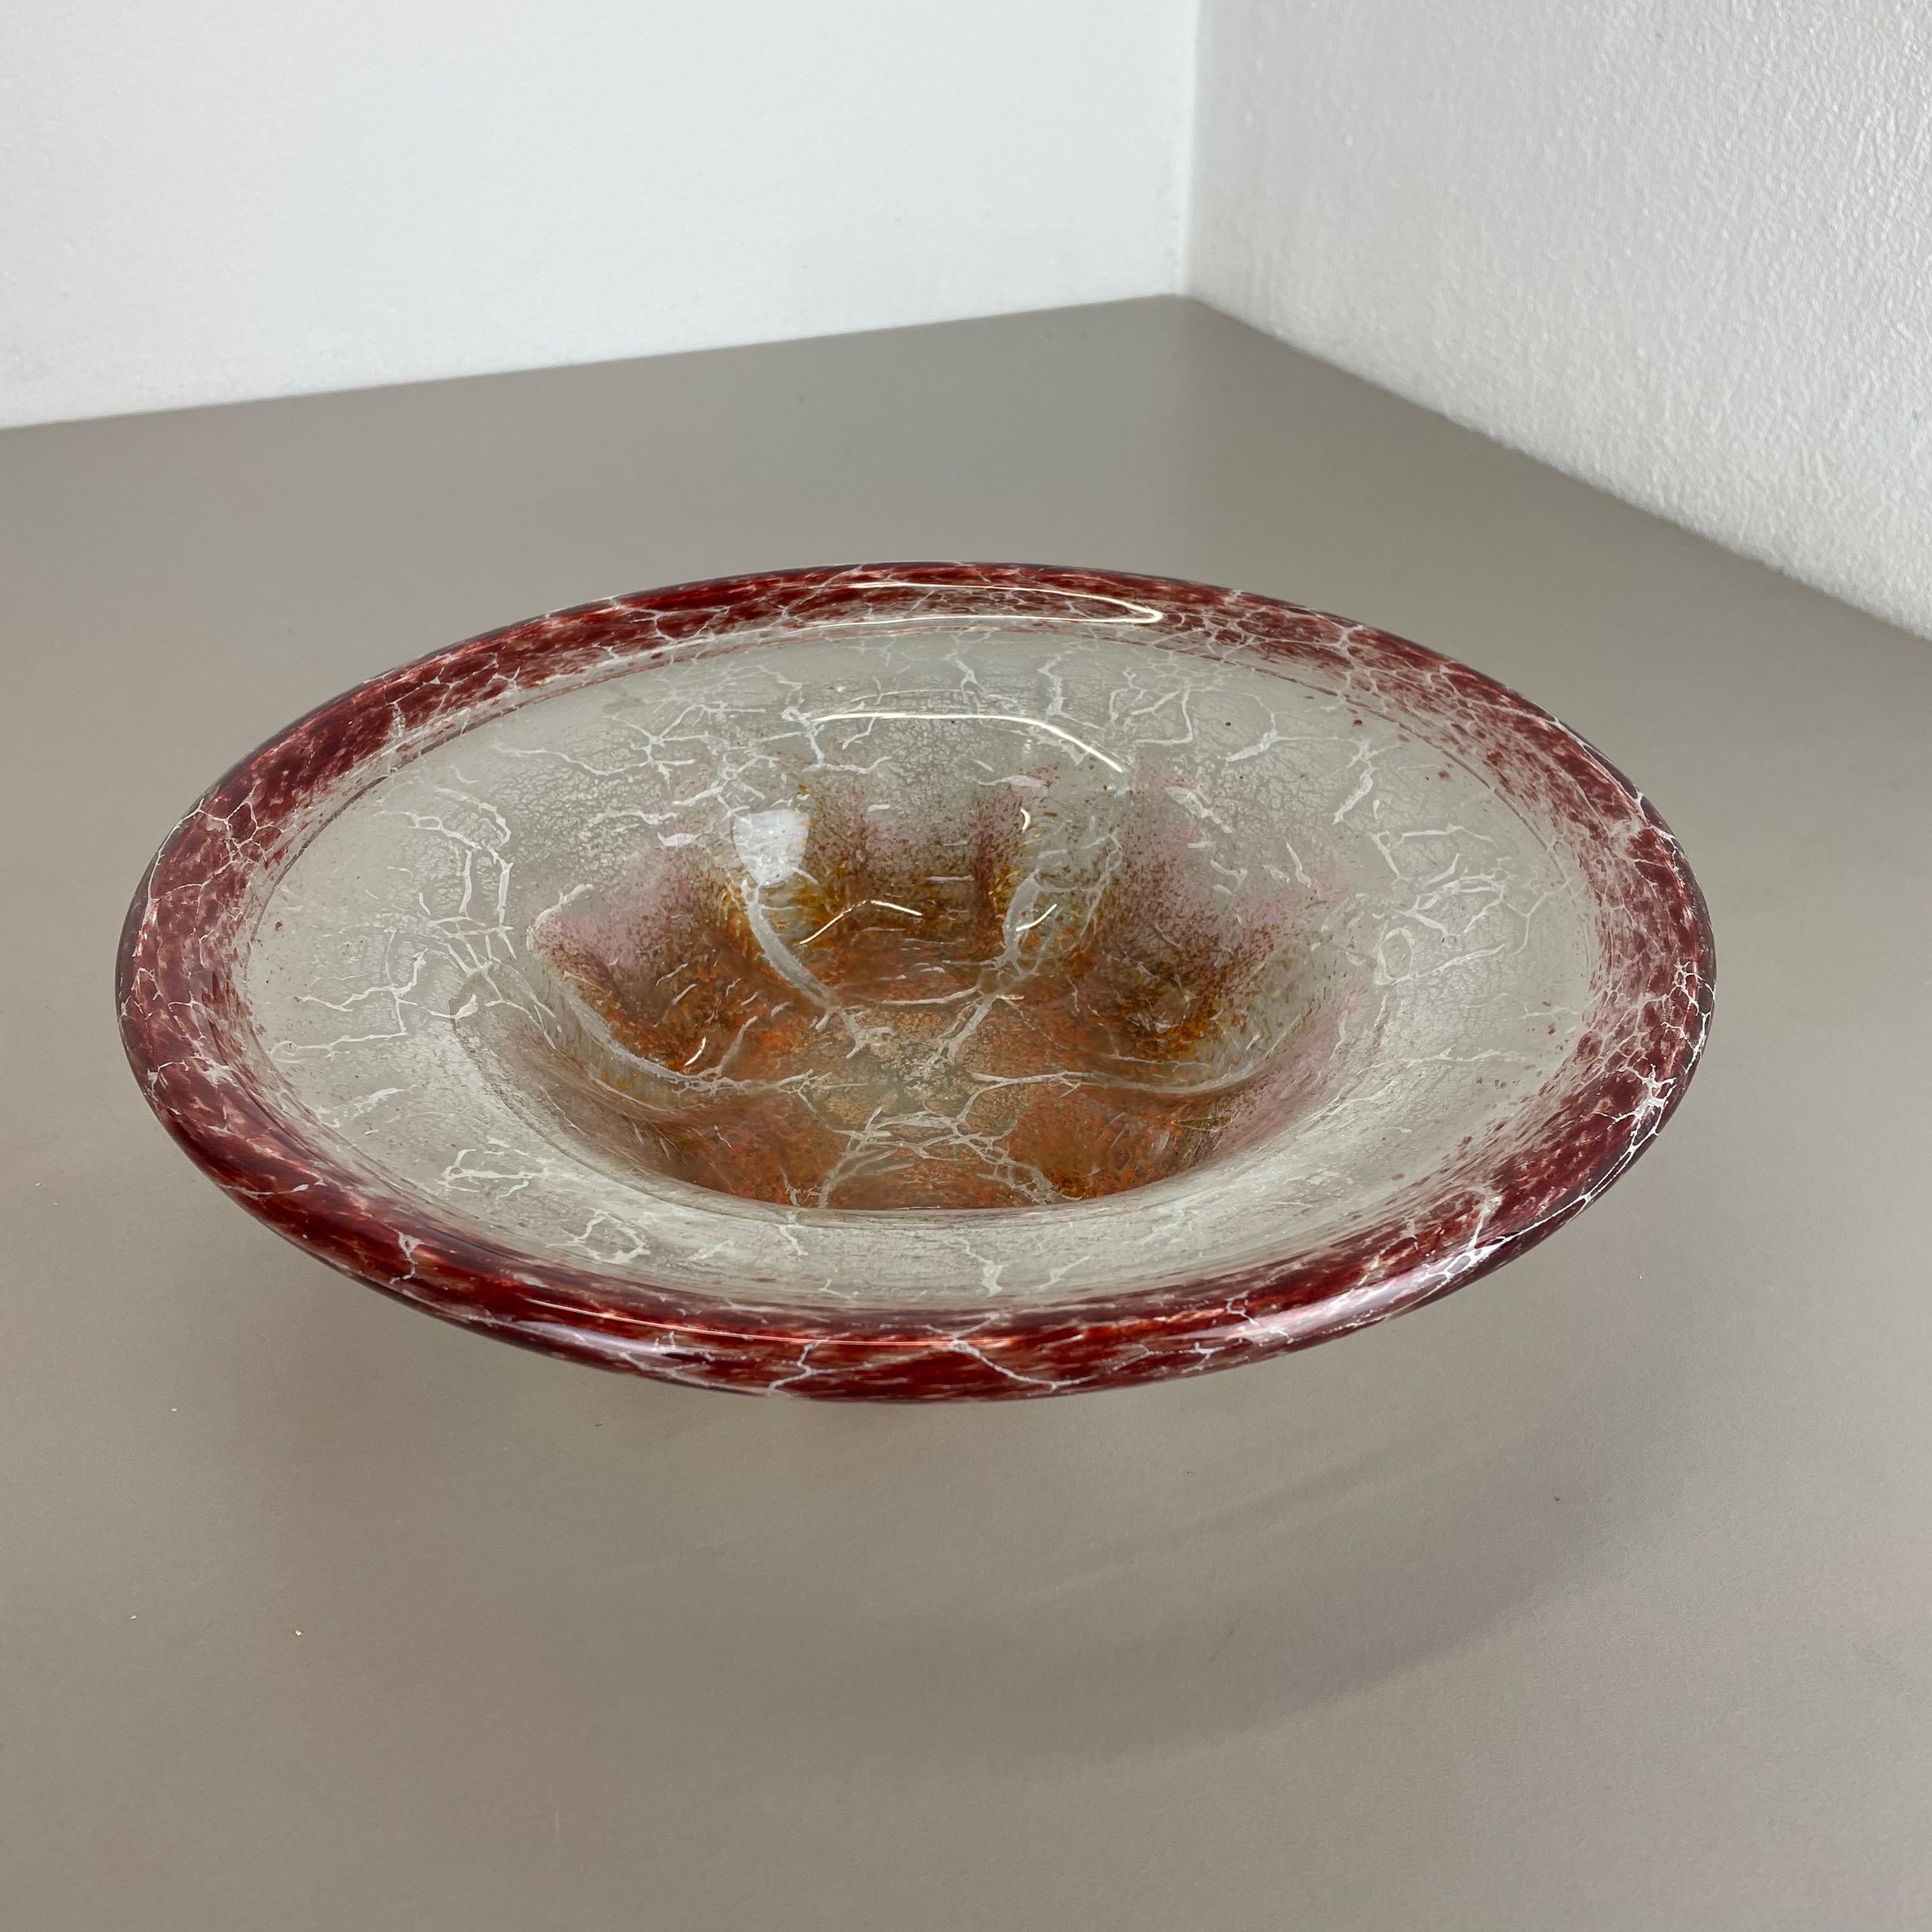 20th Century German Red Glass Bowl by Karl Wiedmann for WMF Ikora, 1930s Baushaus Art Deco For Sale